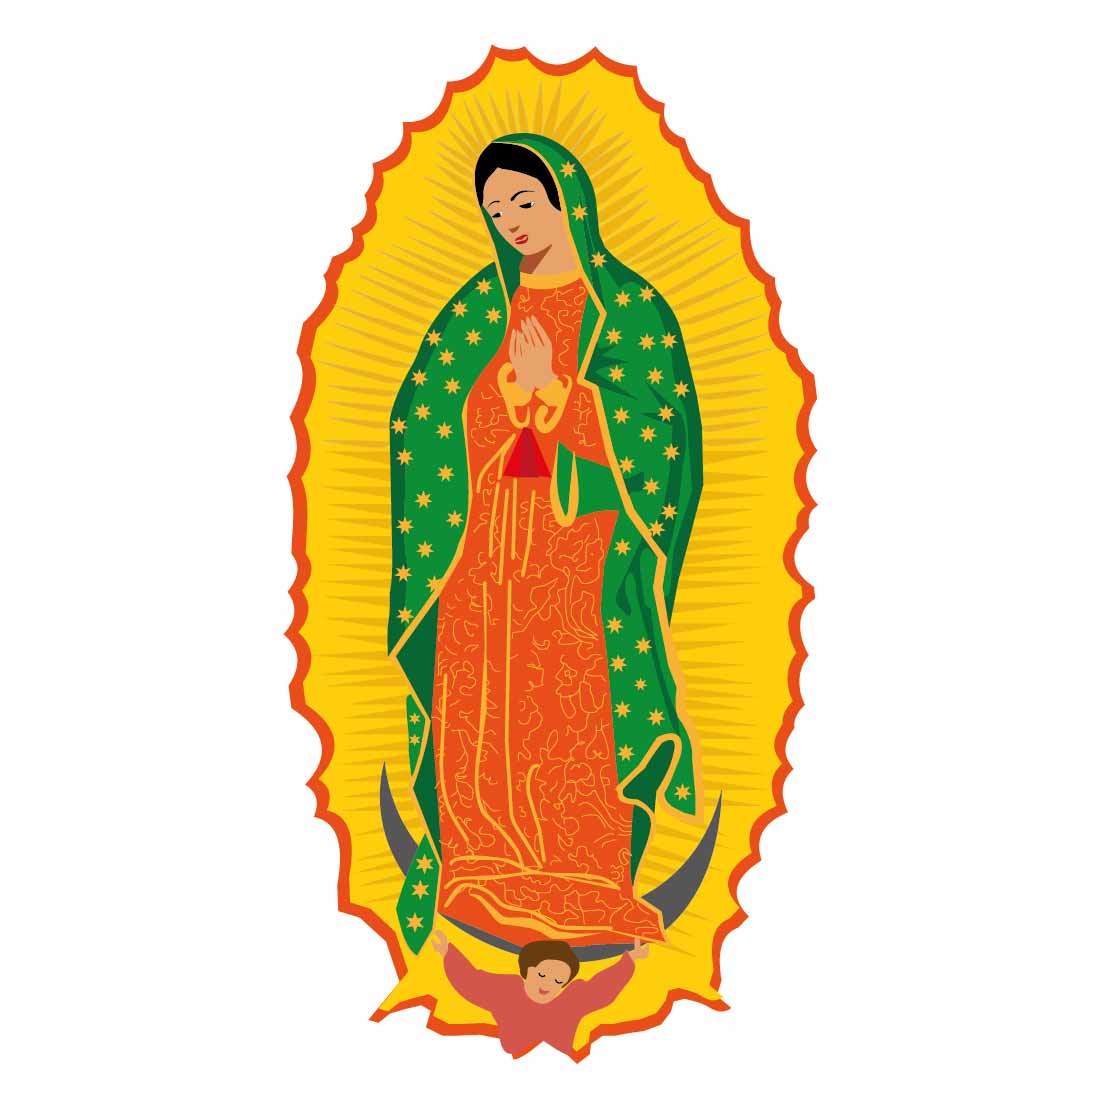 Illustration of the Mexican Virgin of Guadalupe in vectors preview image.